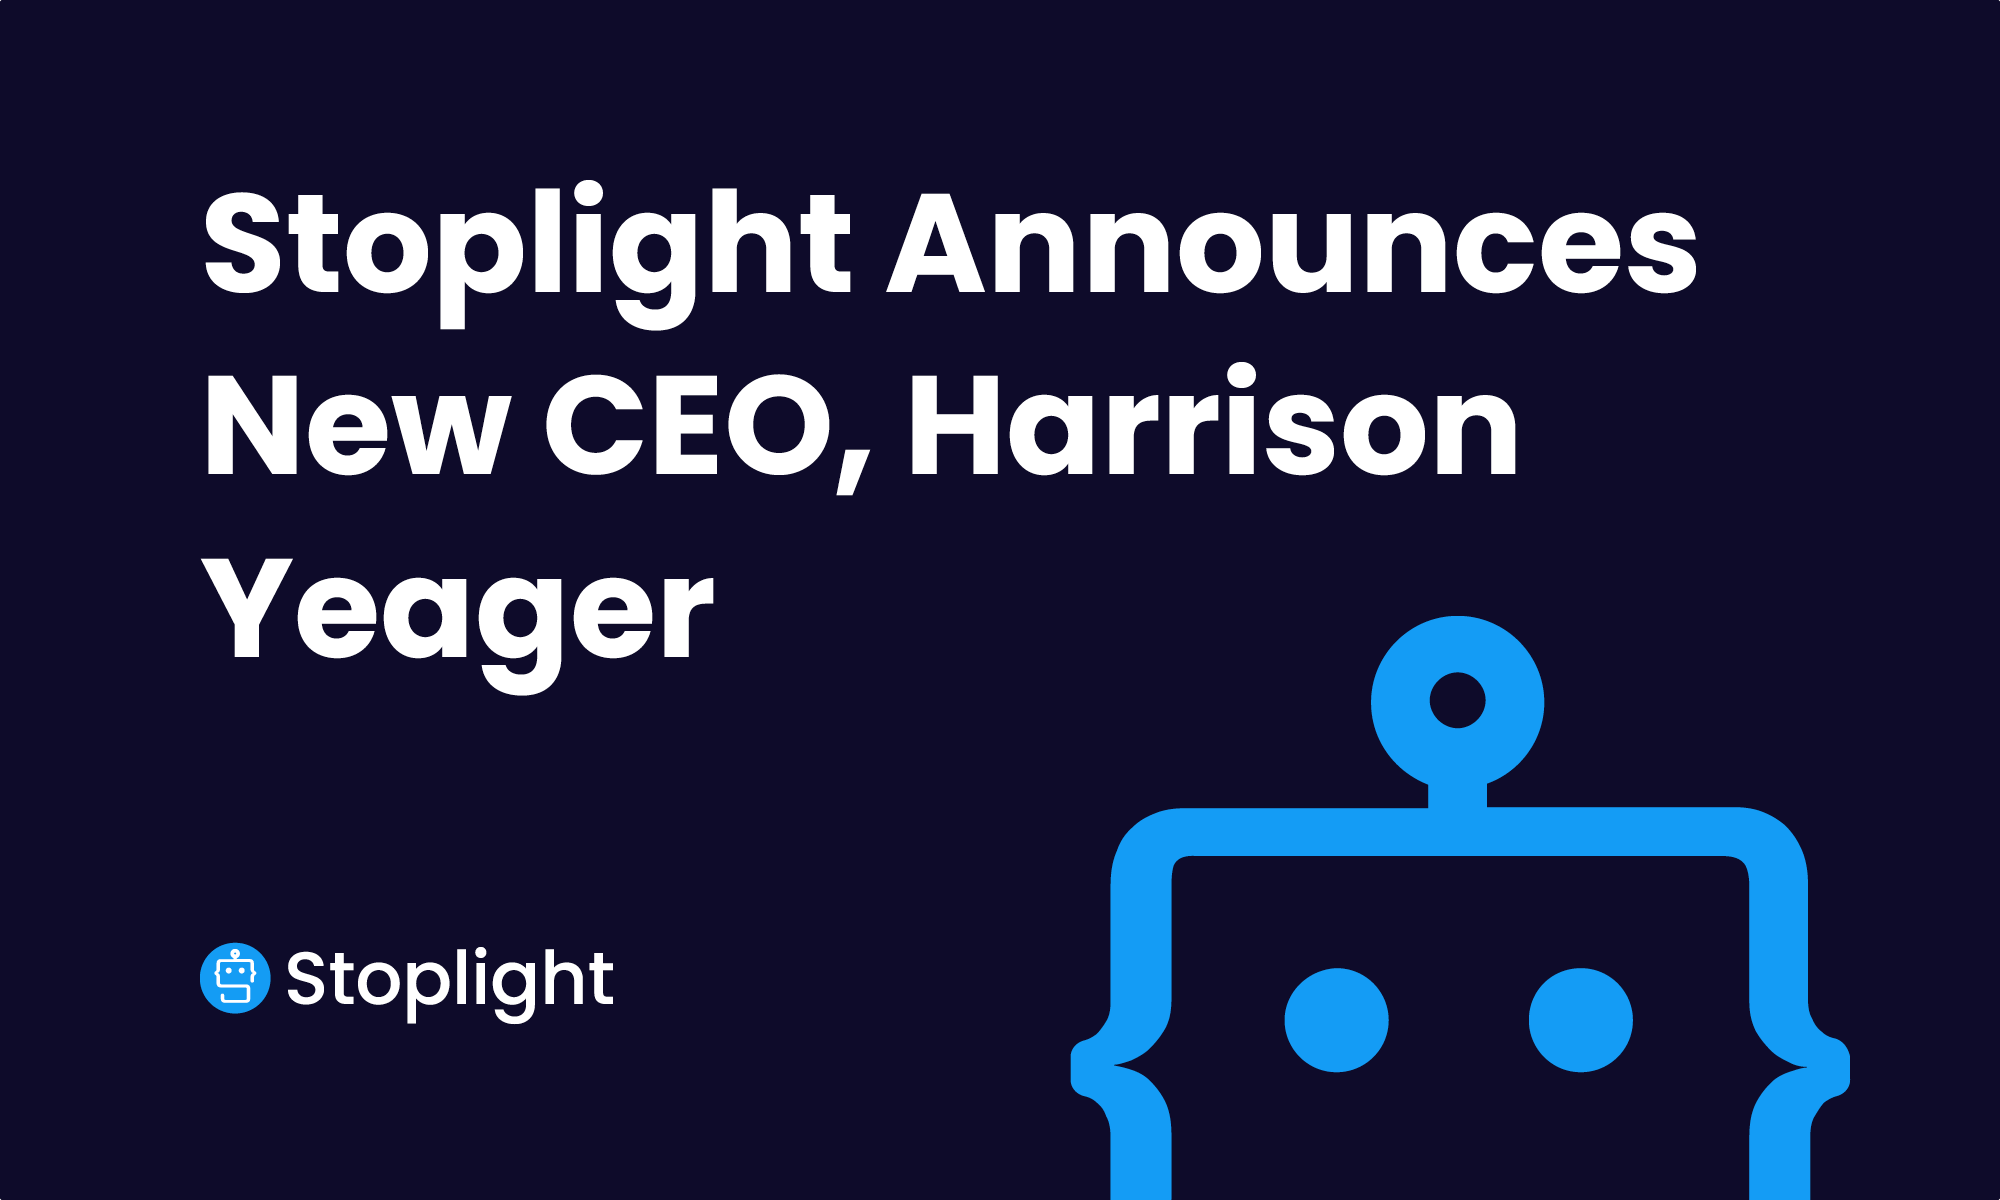 Stoplight Announces New CEO, Harrison Yeager